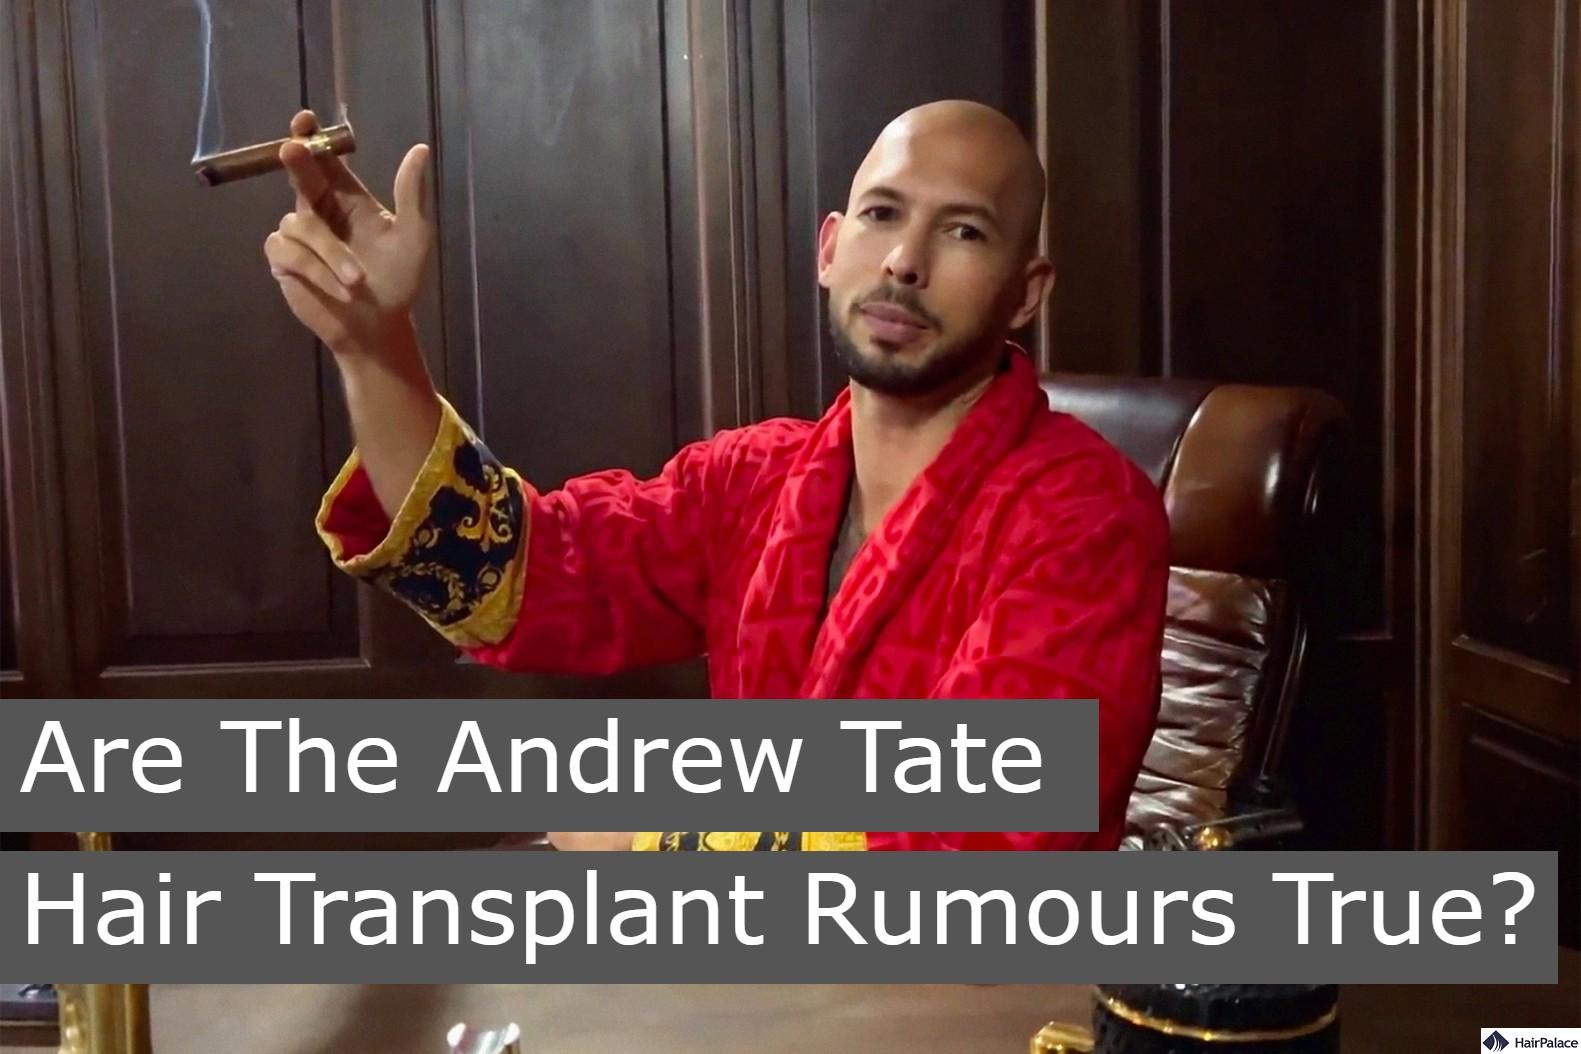 Are the andrew tate hair transplant rumours true